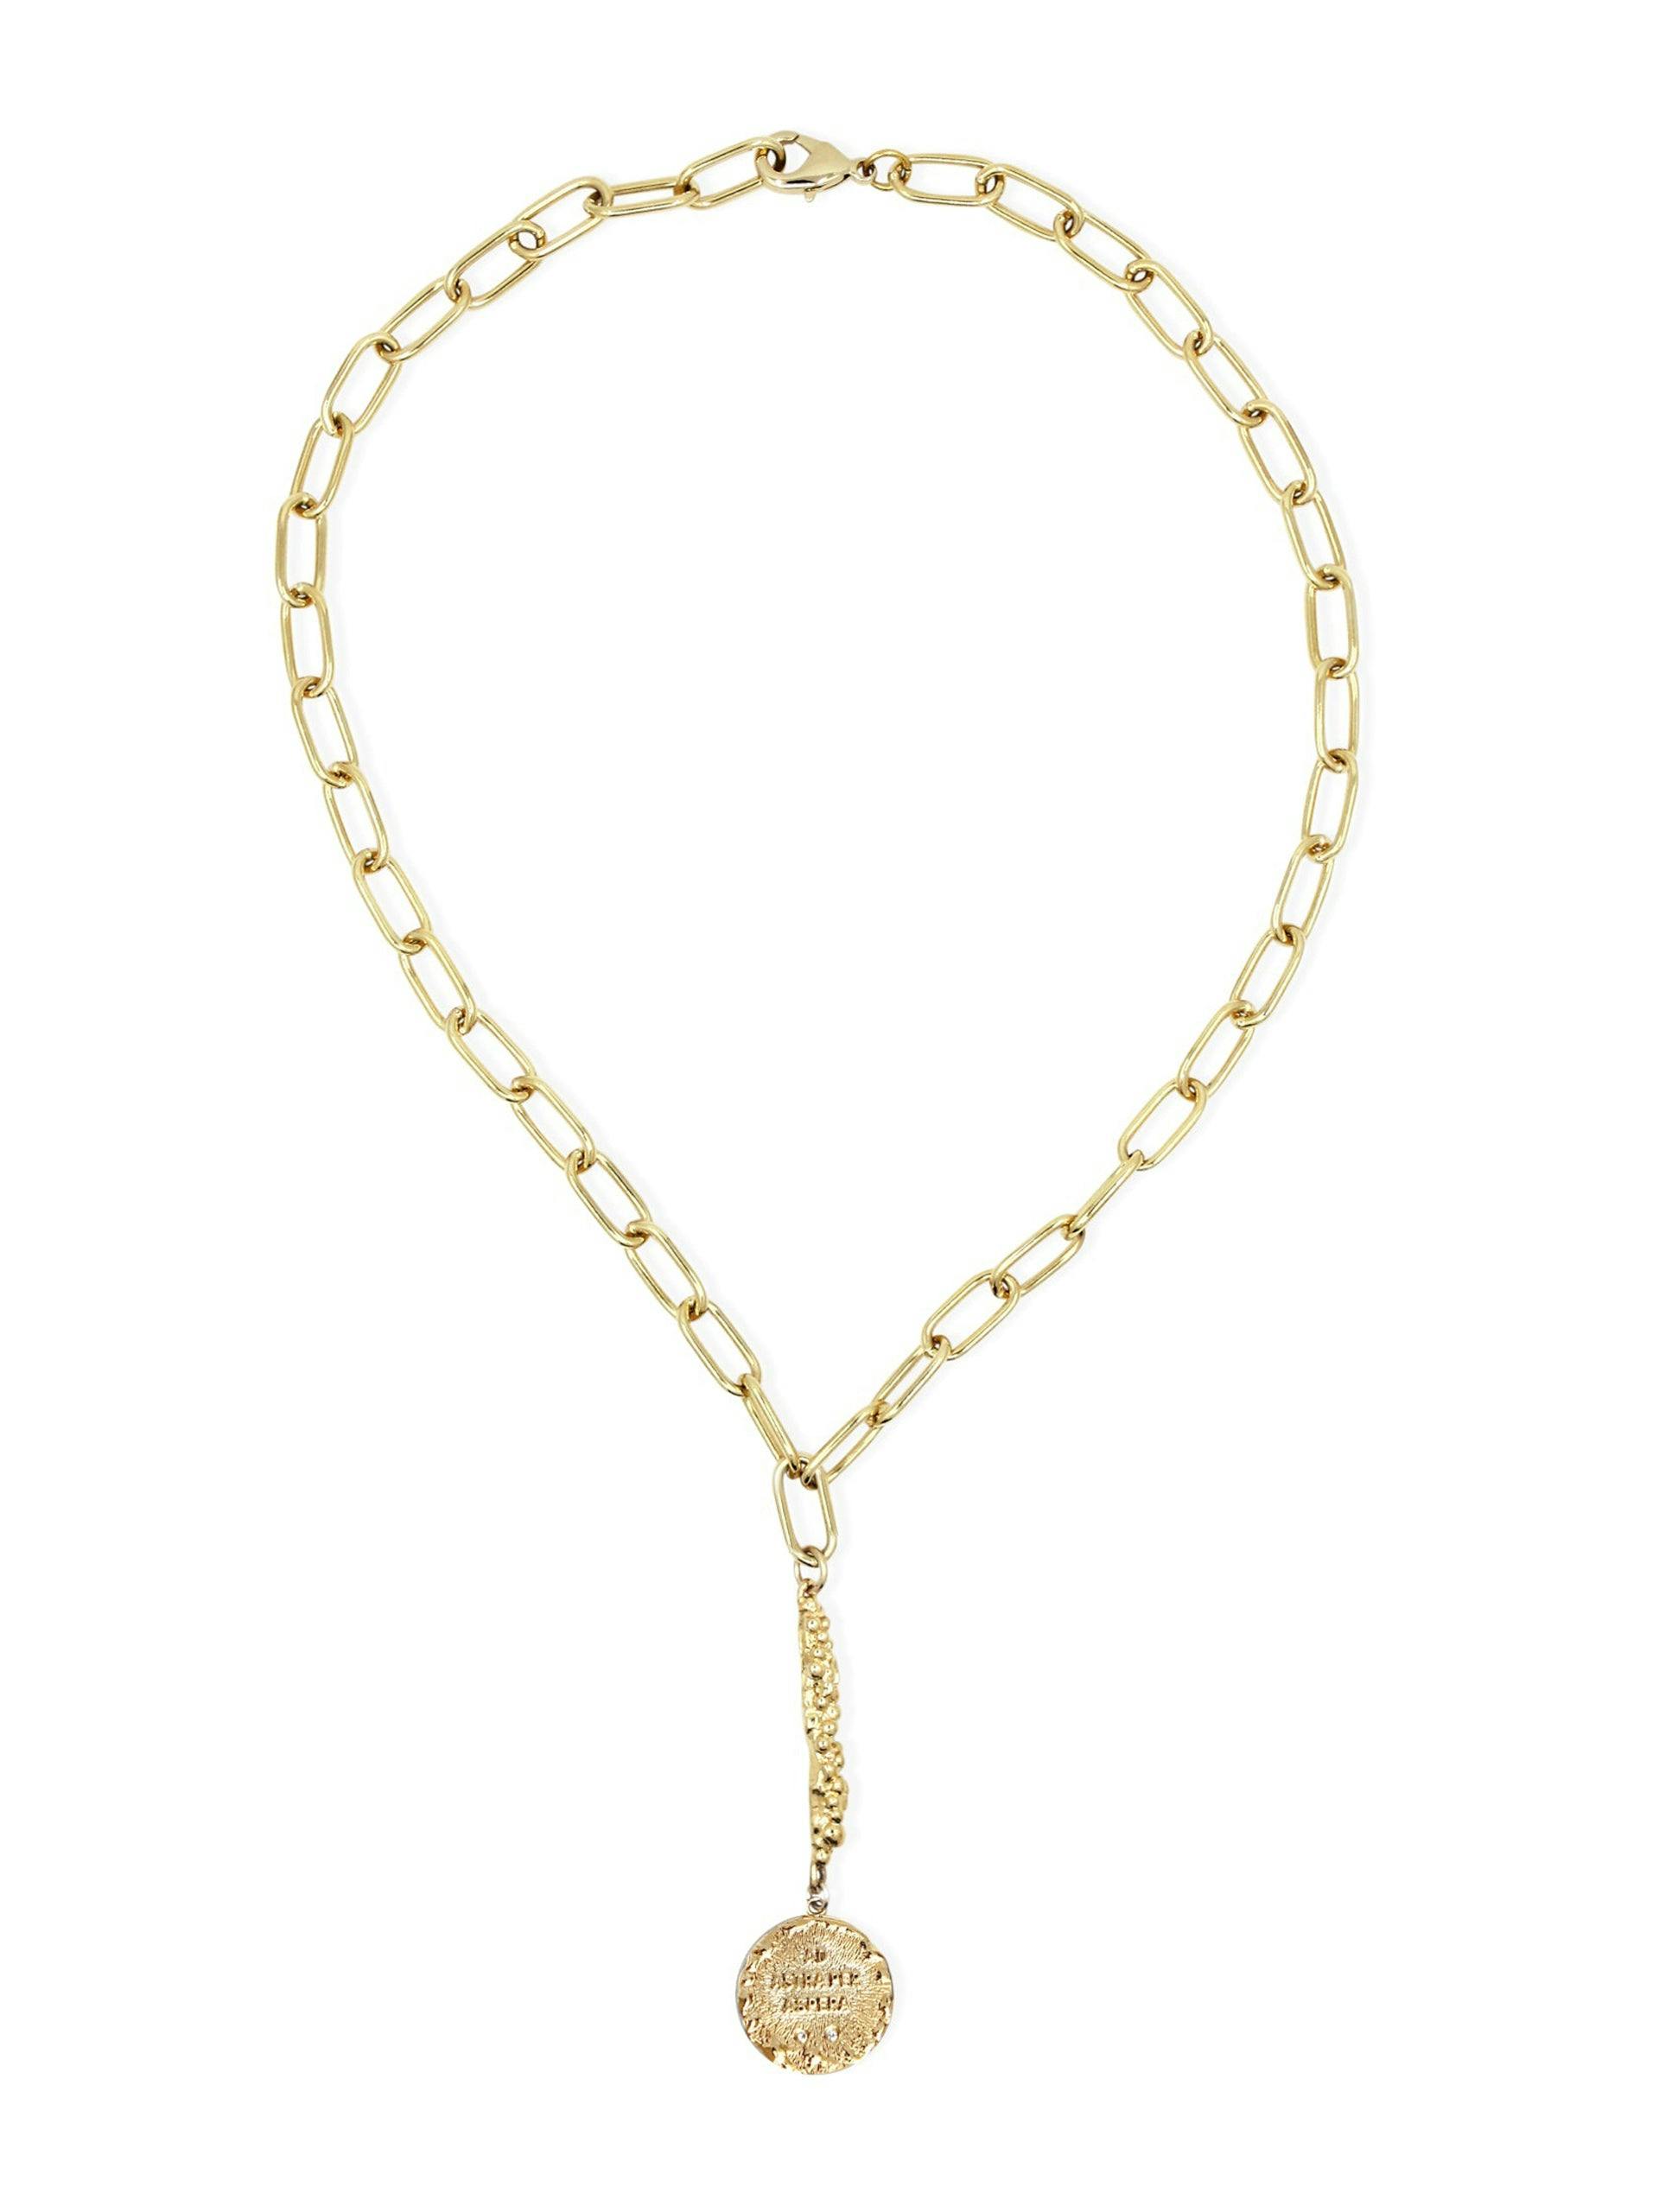 Dawn gold necklace